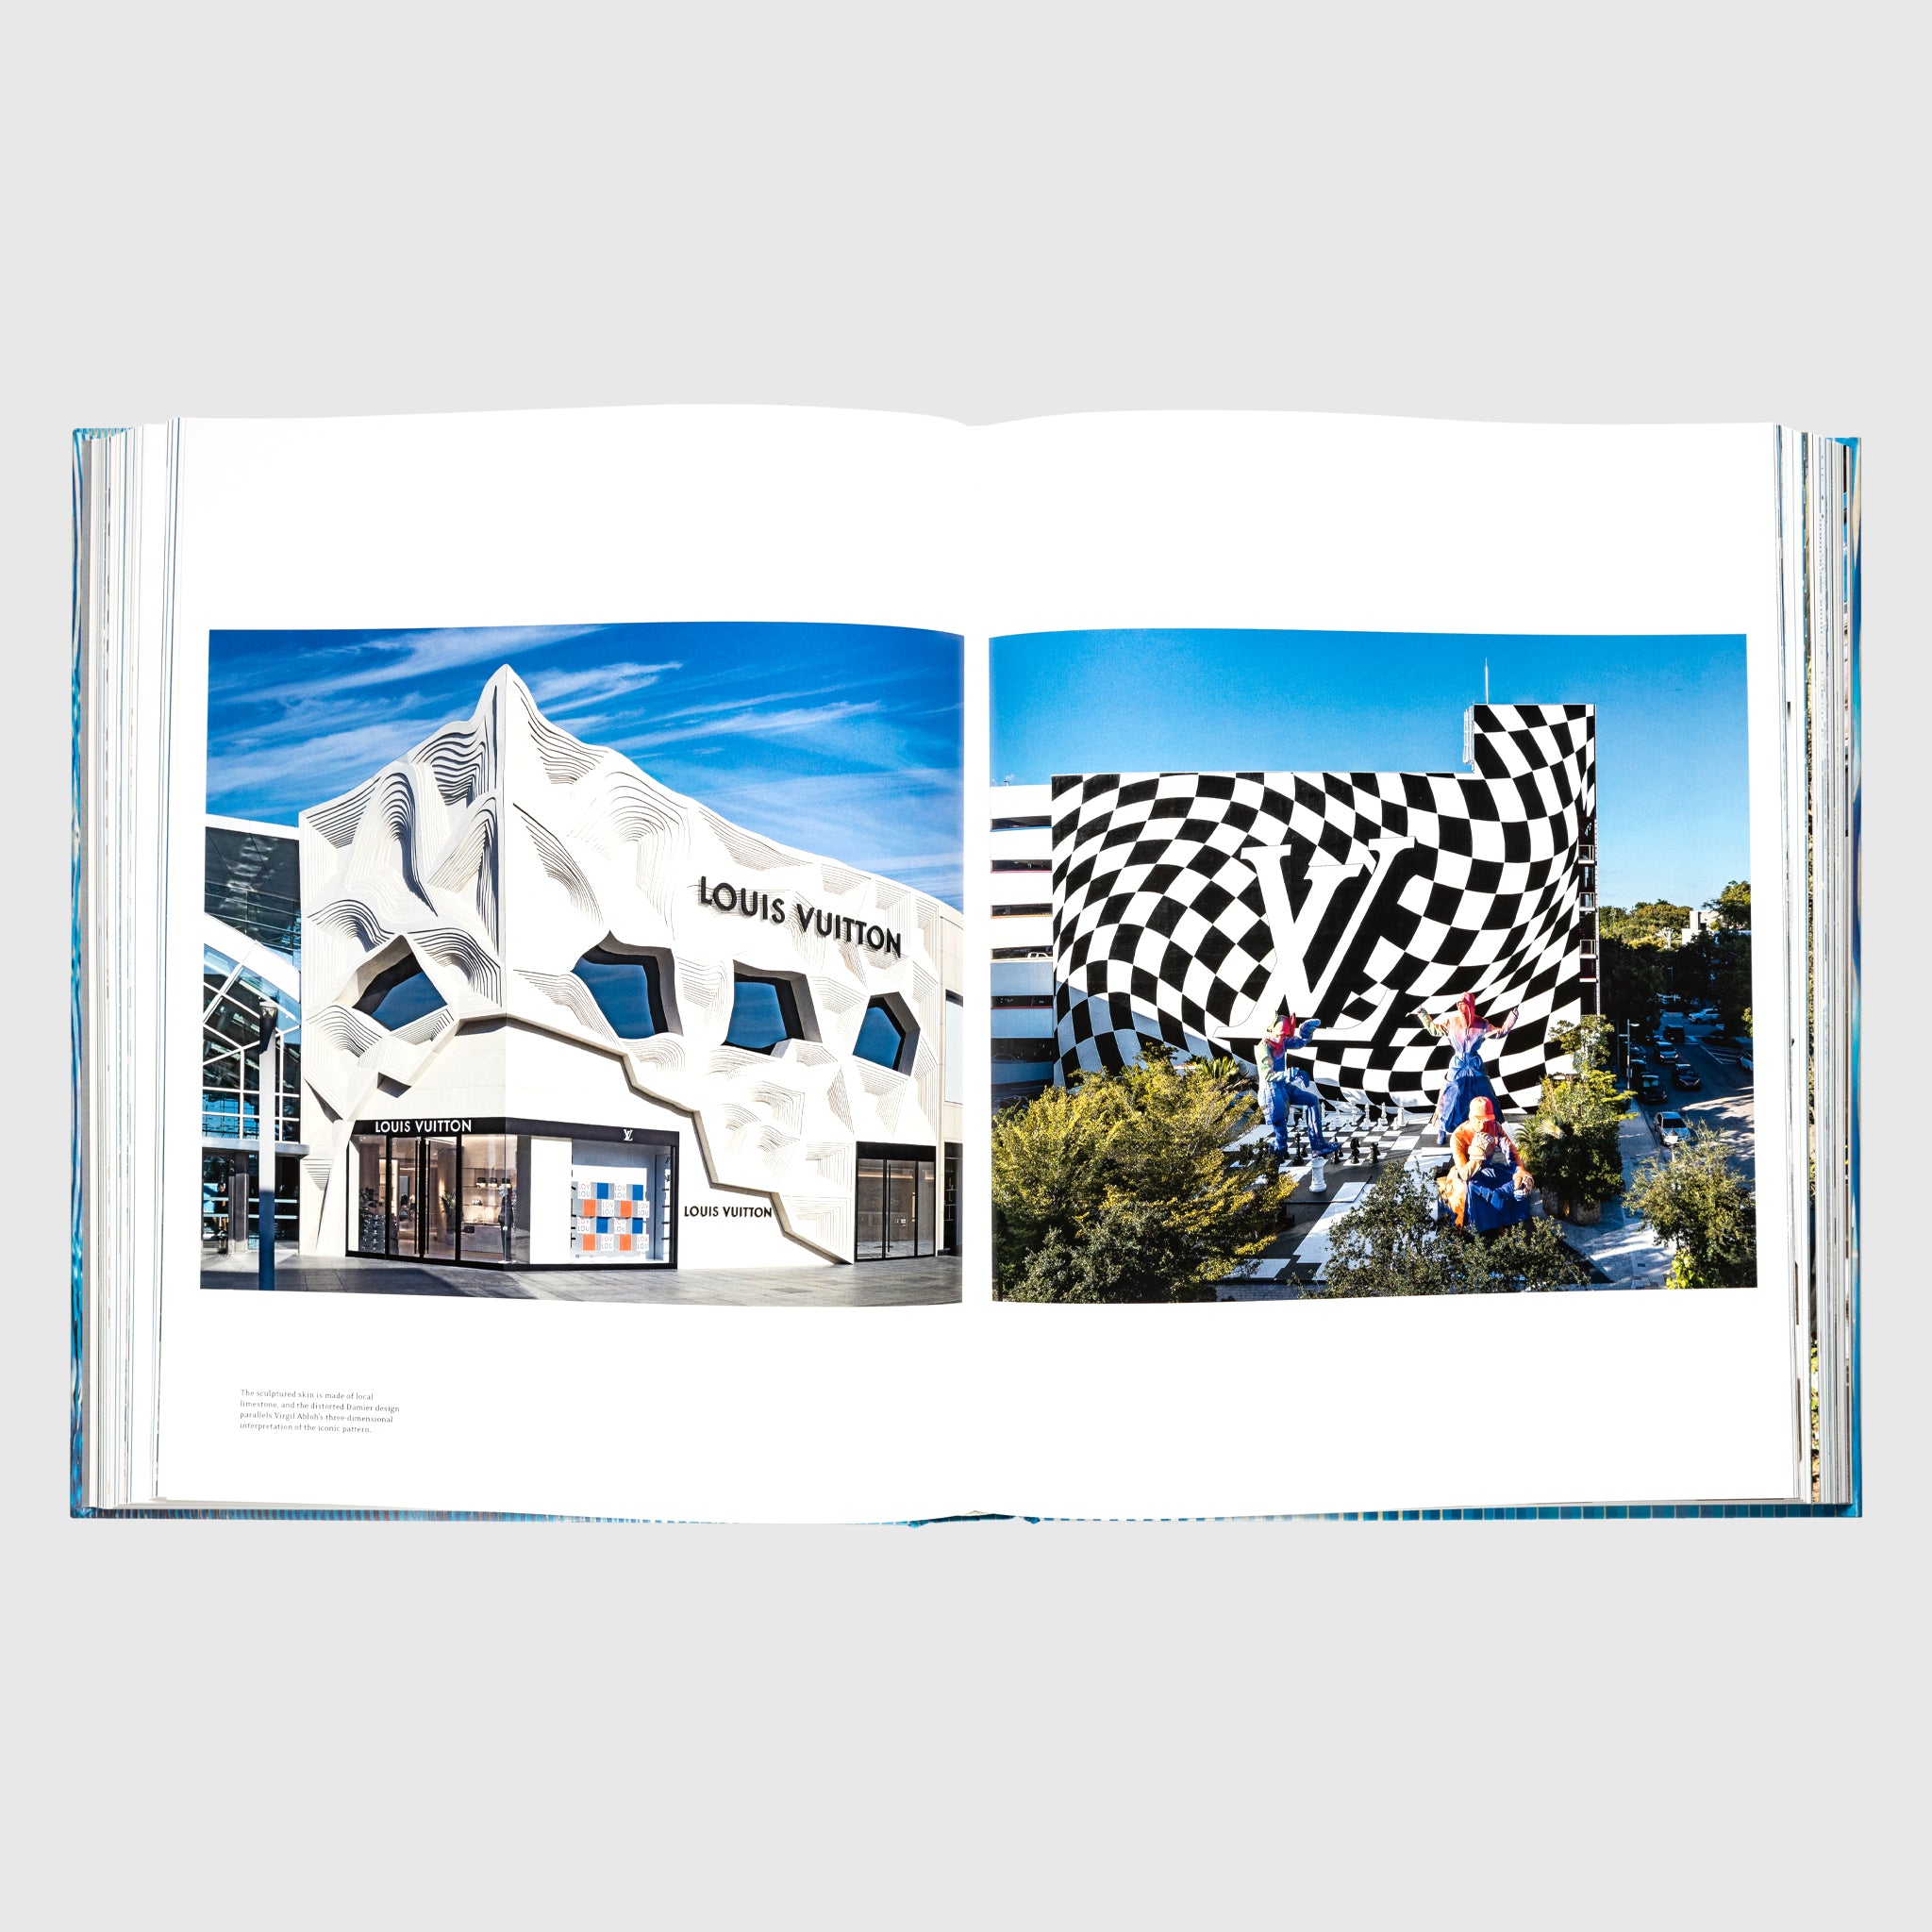 New Louis Vuitton 'Skin' Book Explores the Maison's Architectural Expertise